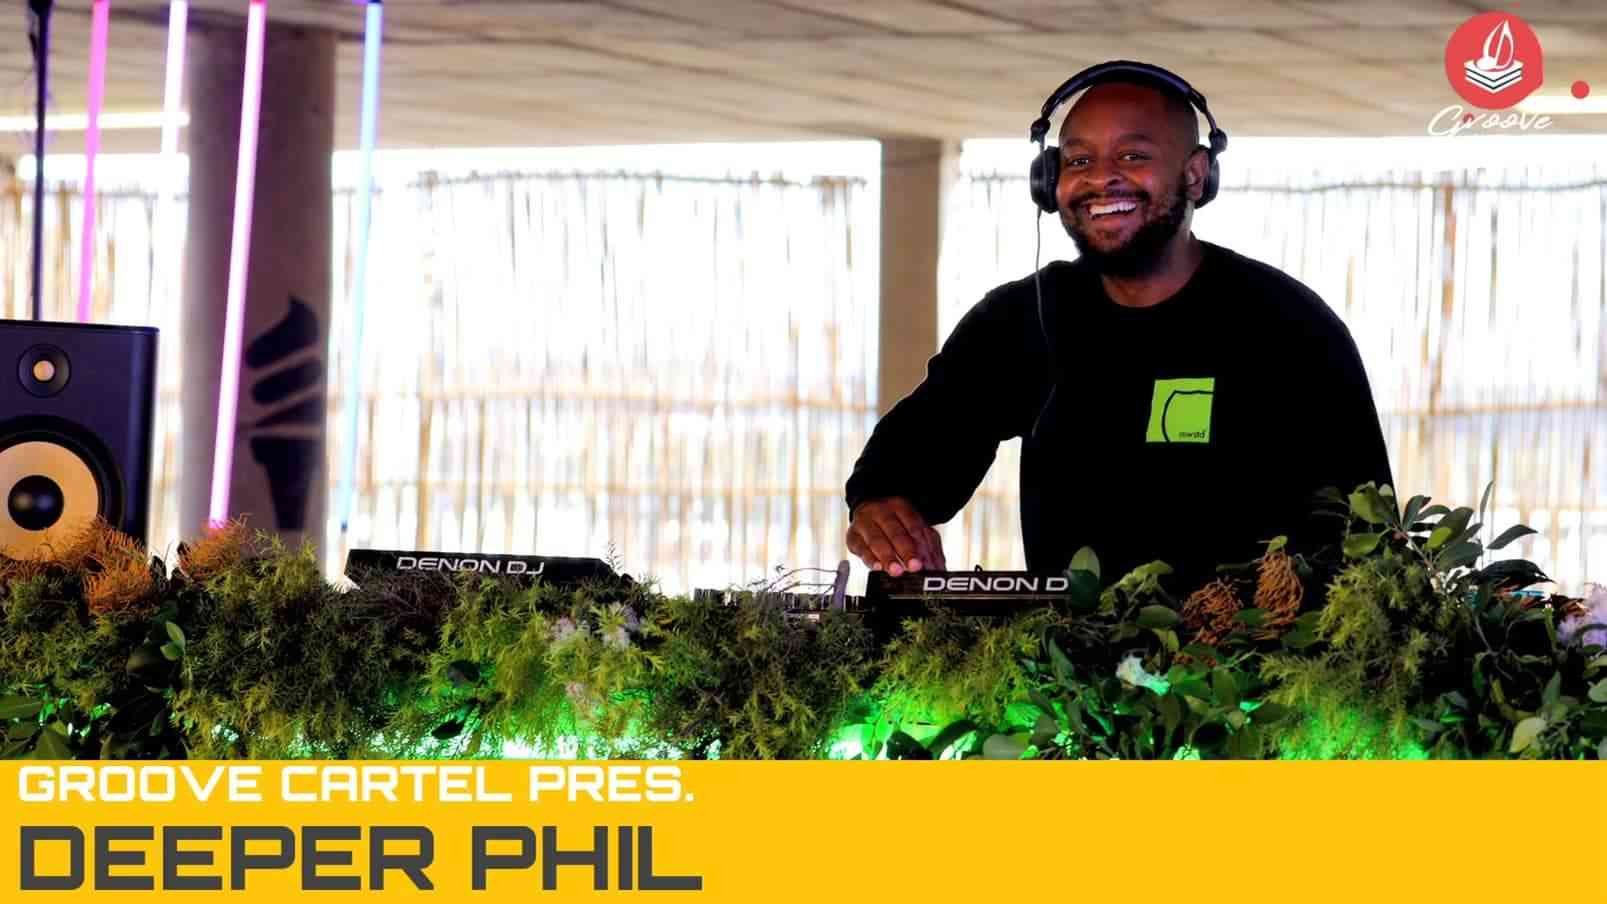 Deeper Phil - Groove Cartel Amapiano Mix